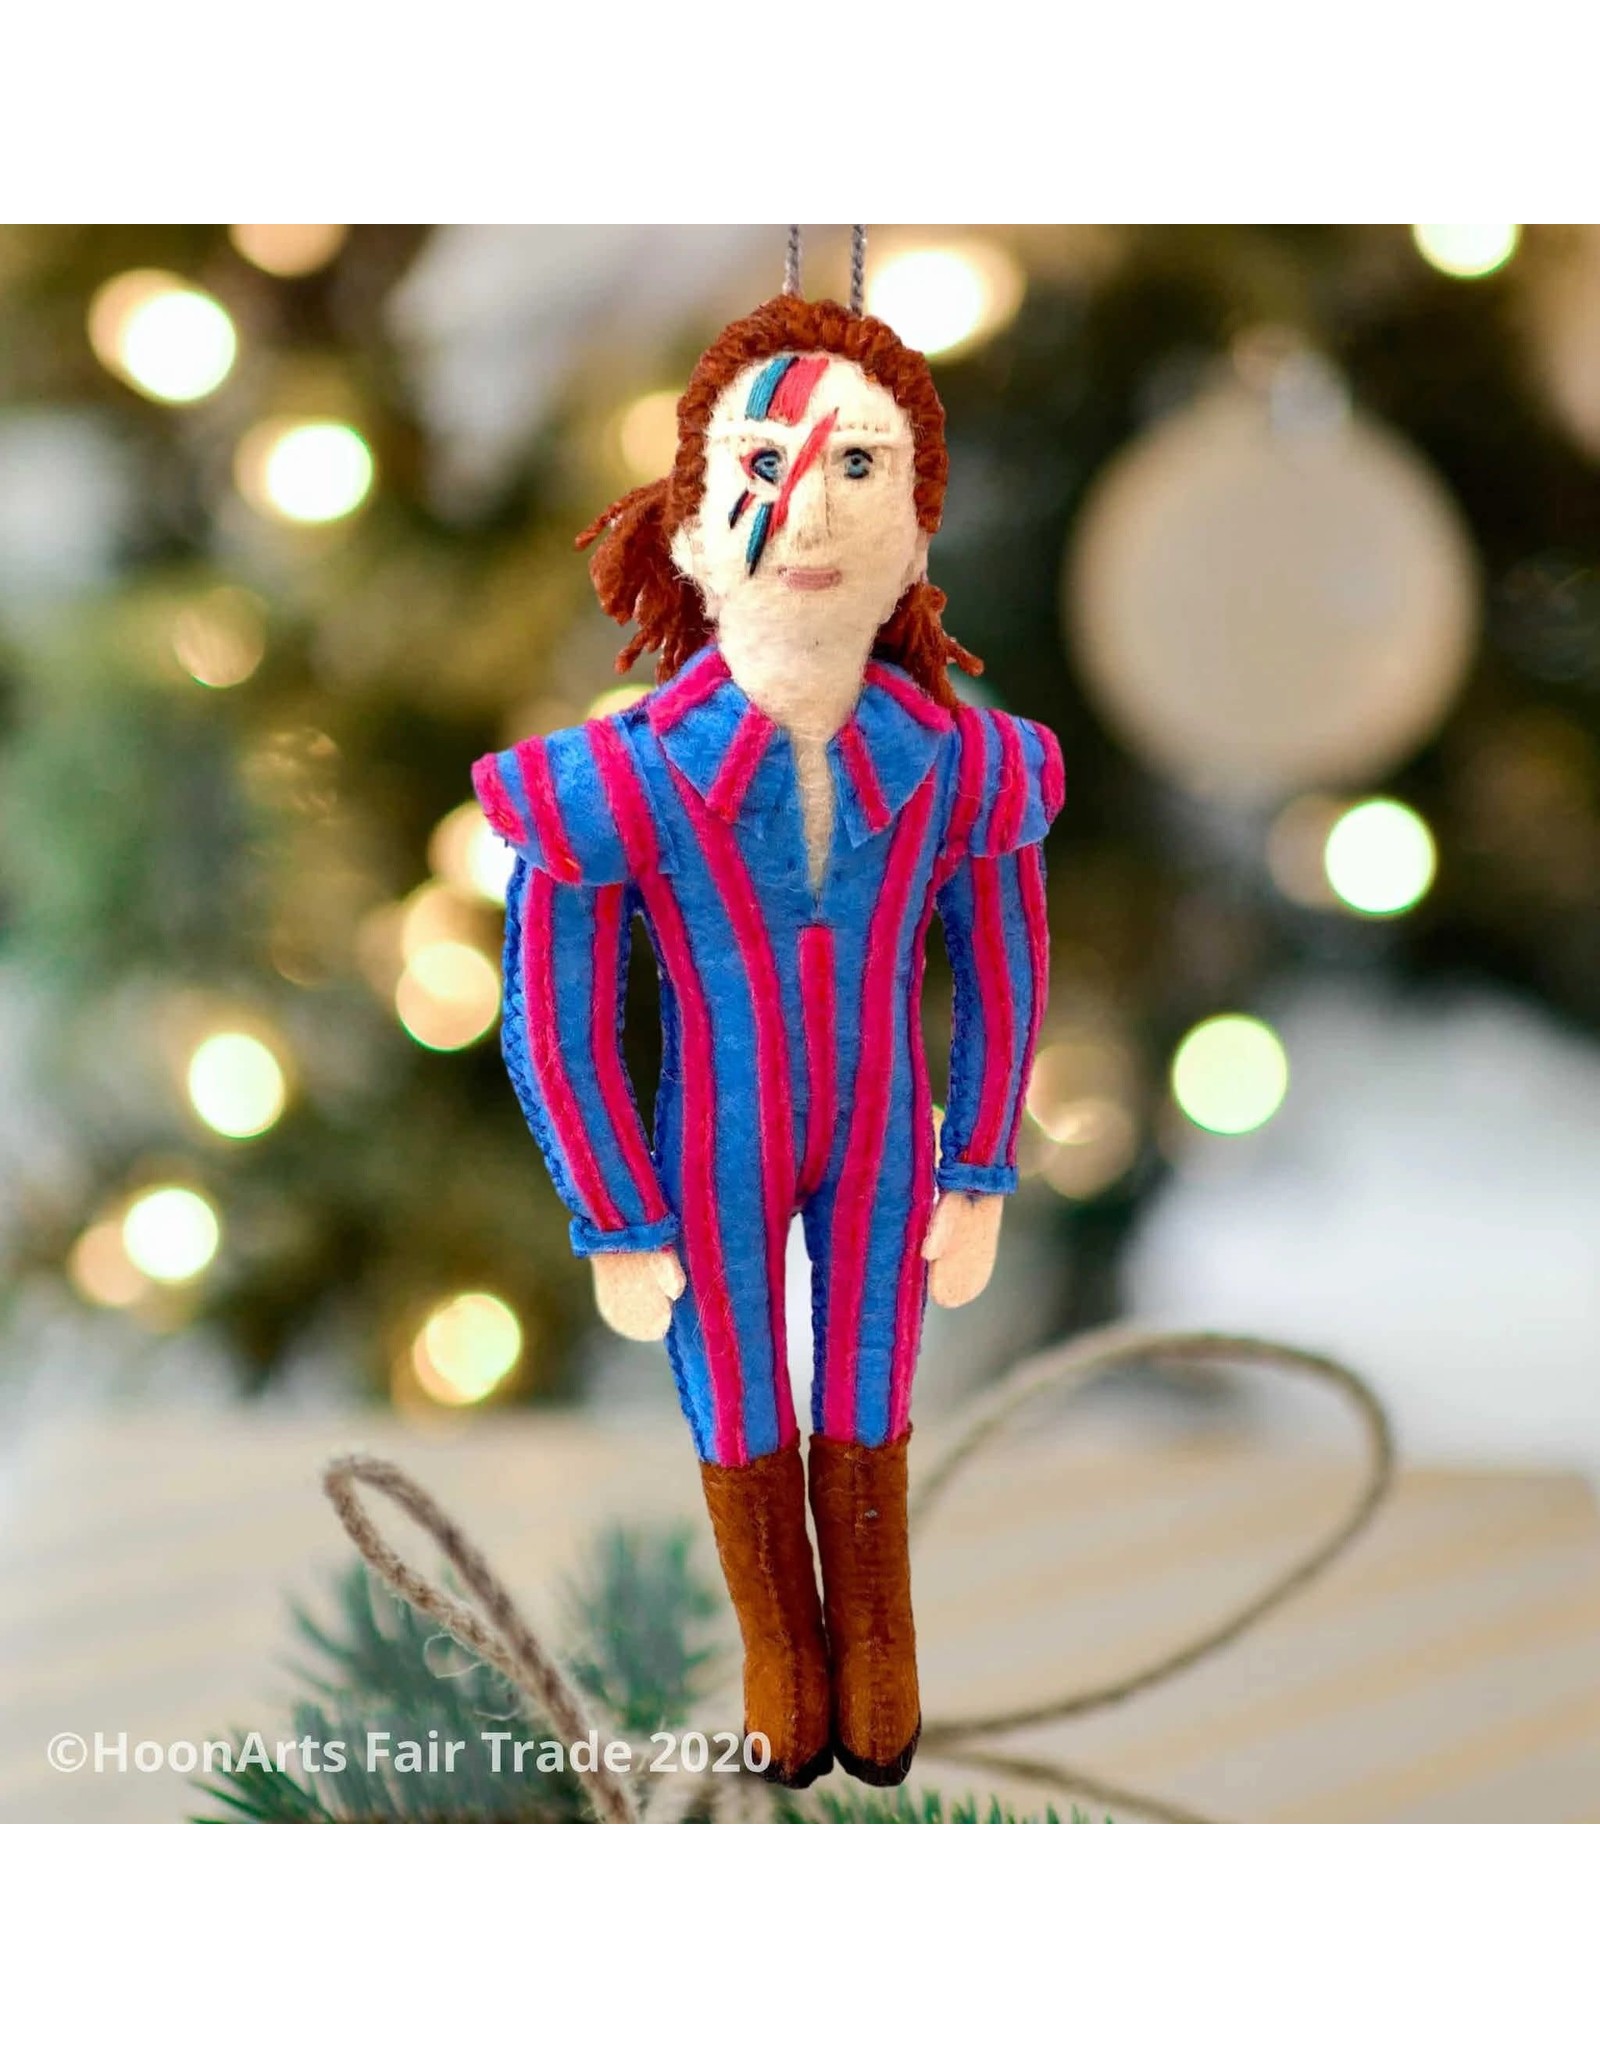 Trade roots Ornament David Bowie, Kyrgyzstan